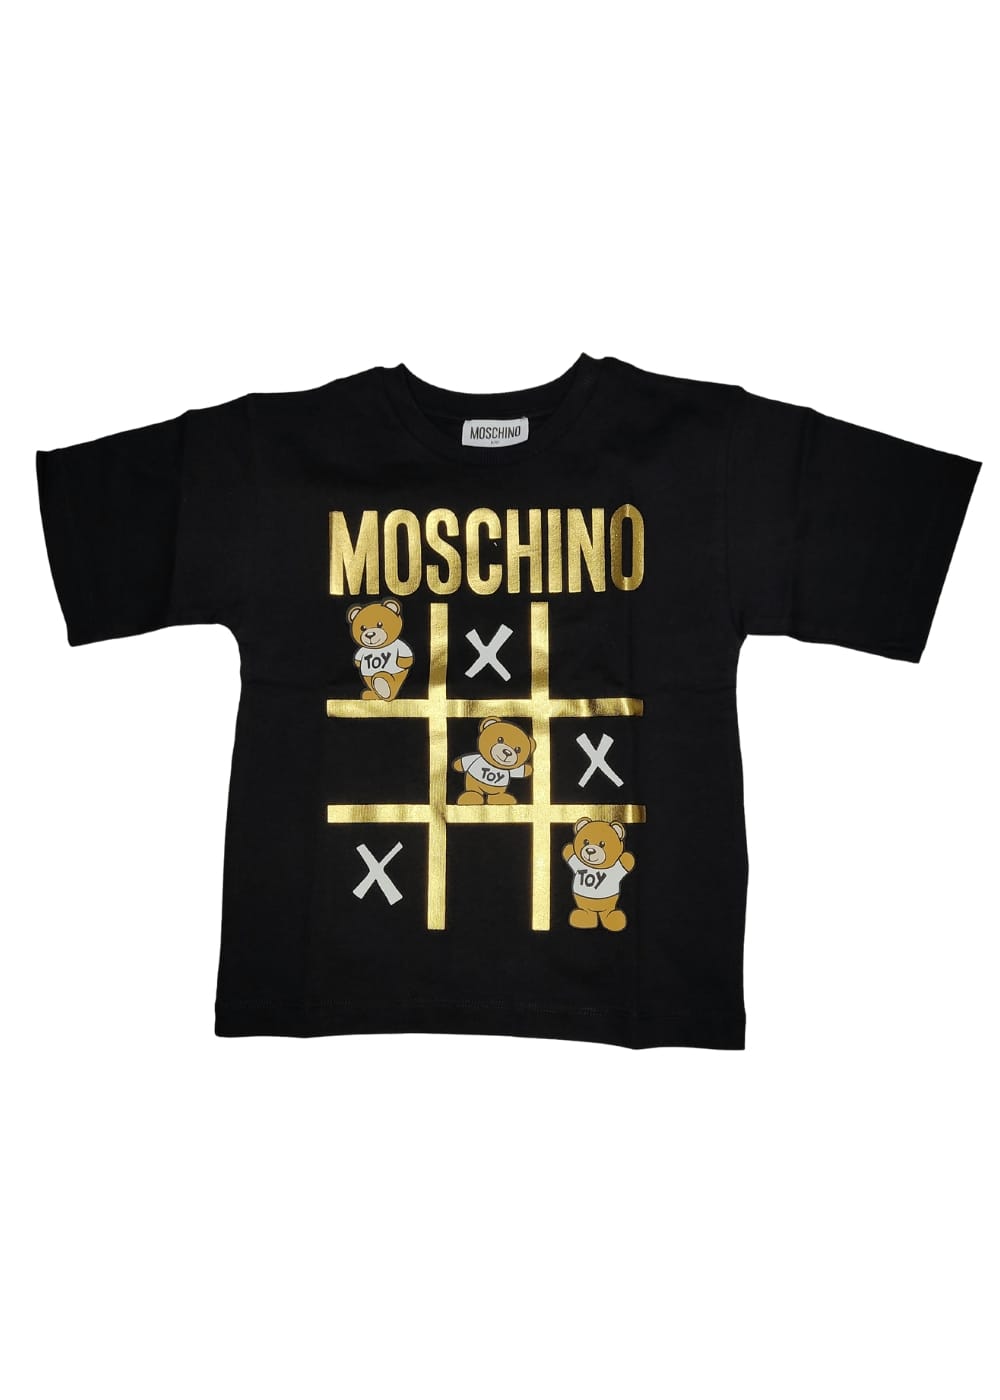 Featured image for “Moschino T-shirt Stampa oro”